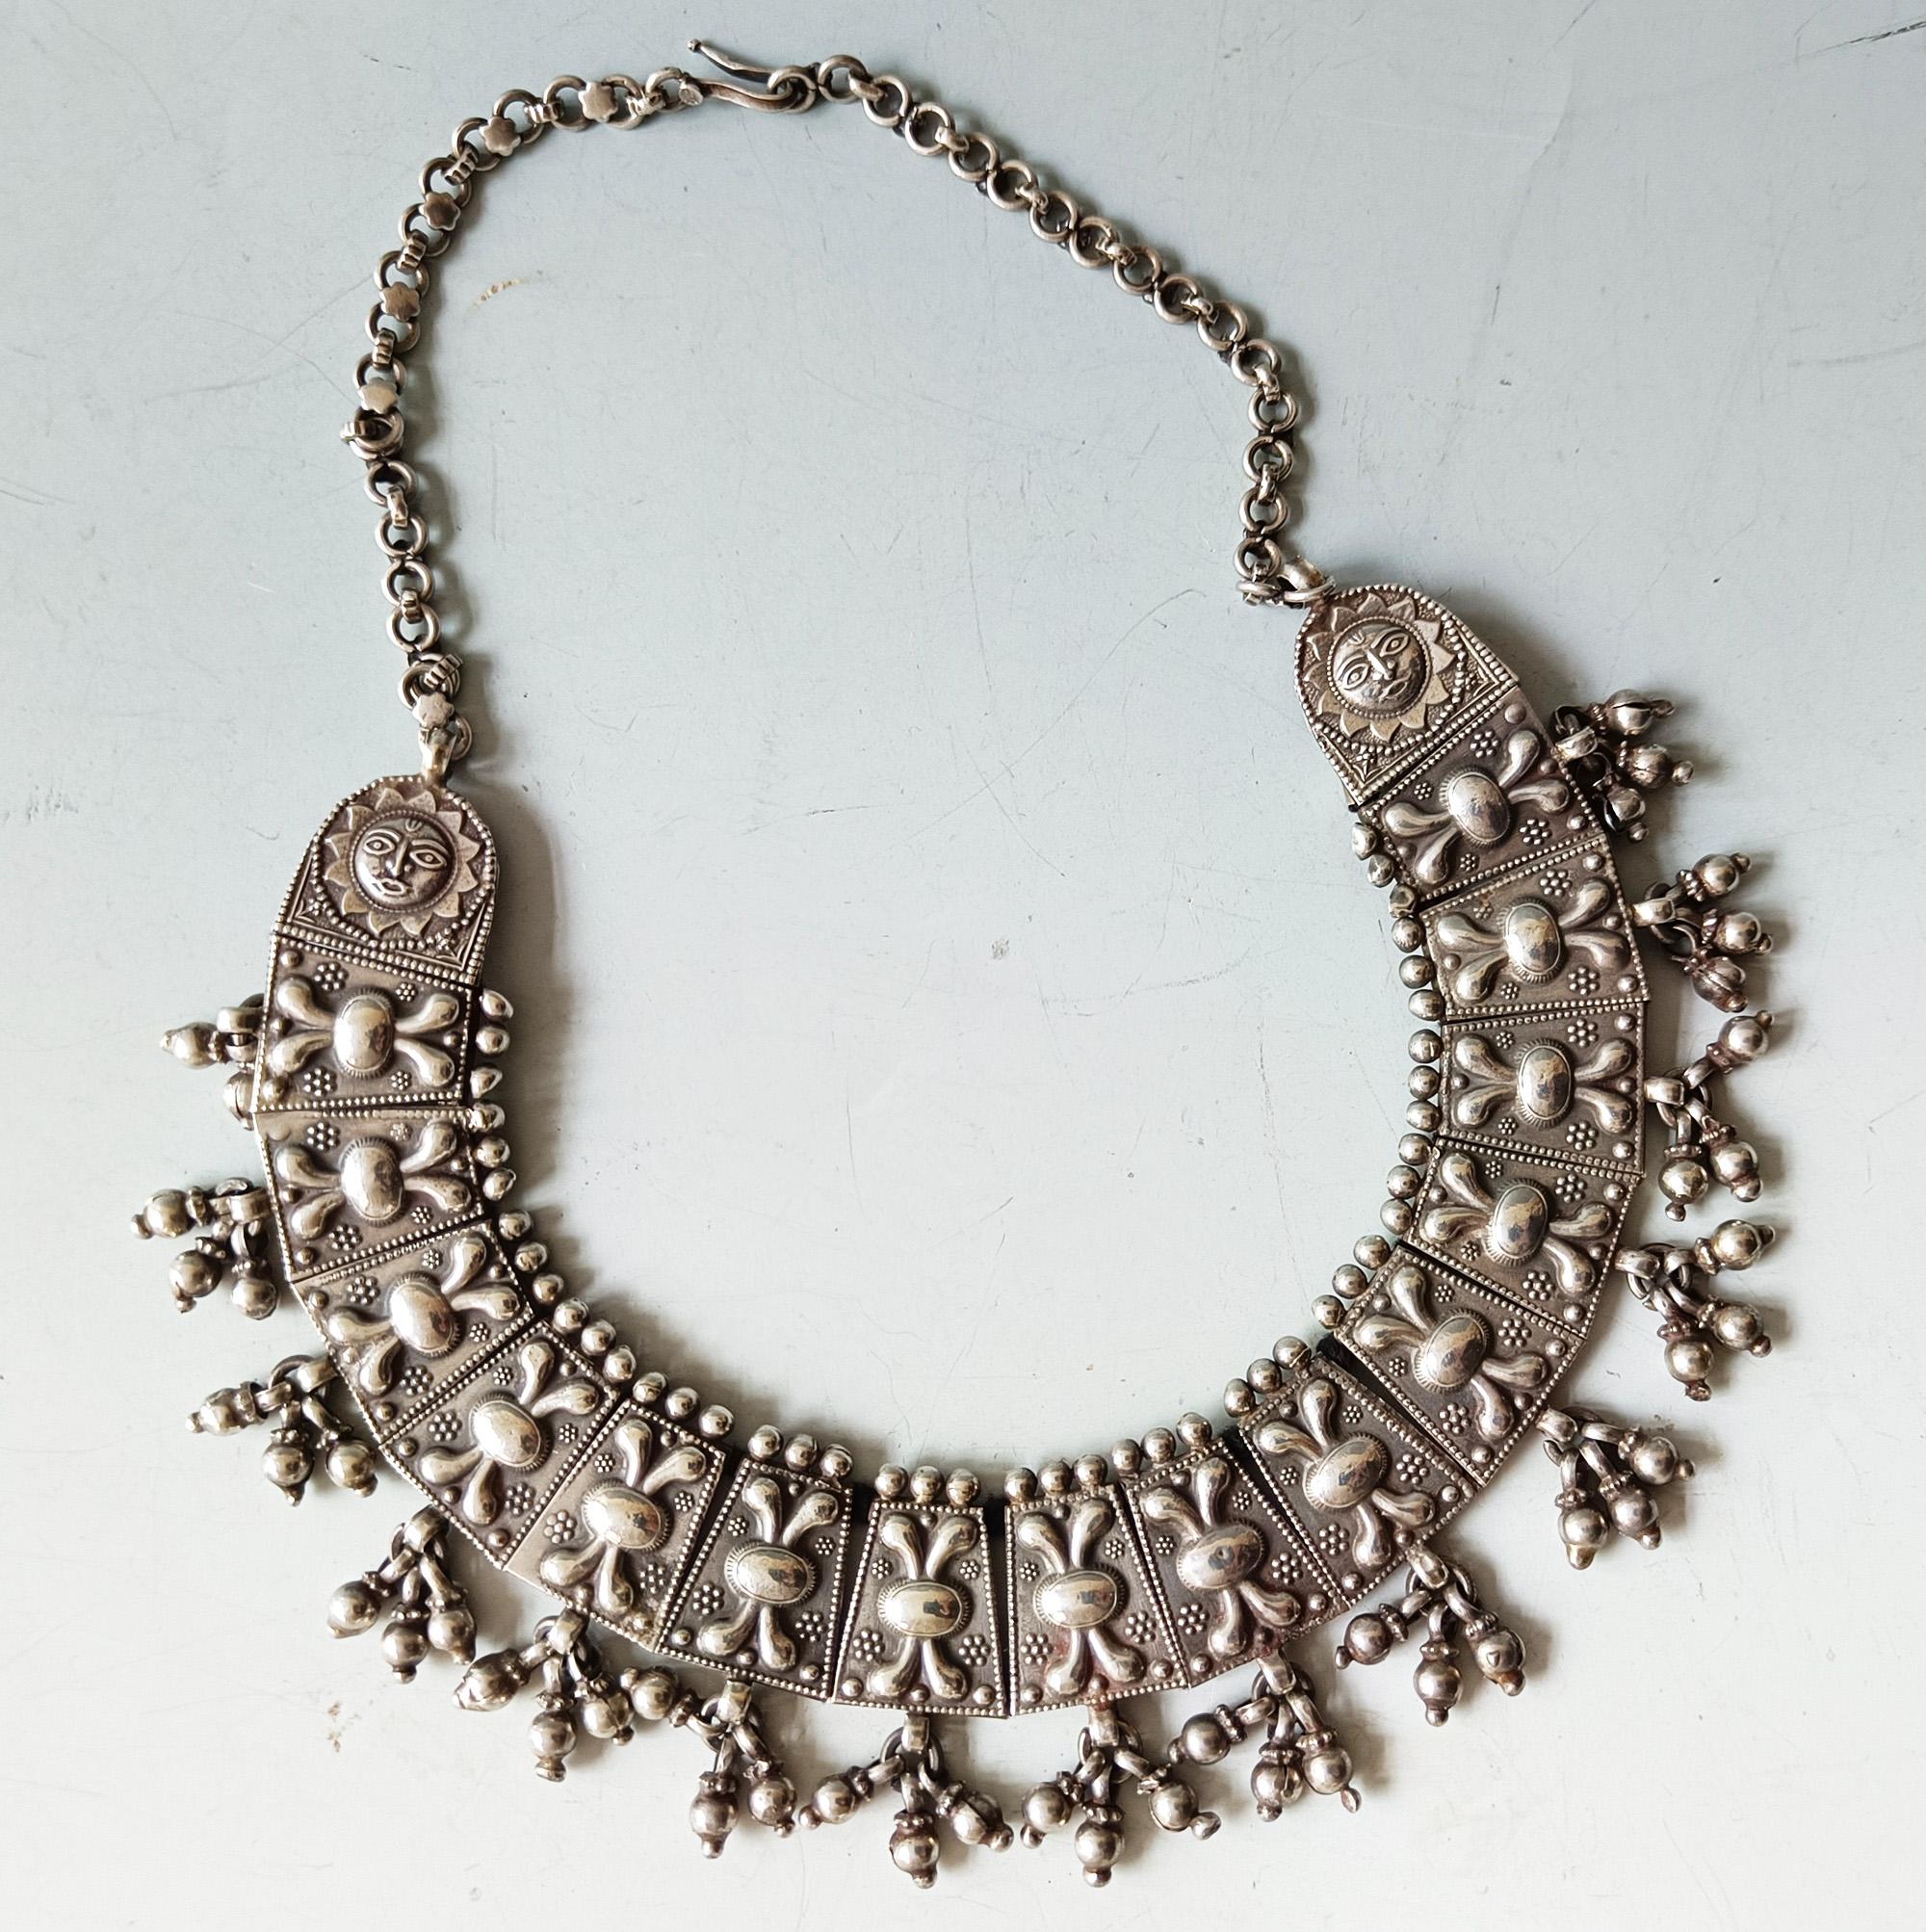 Vintage Indian silver necklace Asian Tribal Jewellery

A Very fine Vintage Indian silver necklace made in sections with floral pattern and sun design and danglers

High grade silver

Weight 148 grams comes with presentation box 